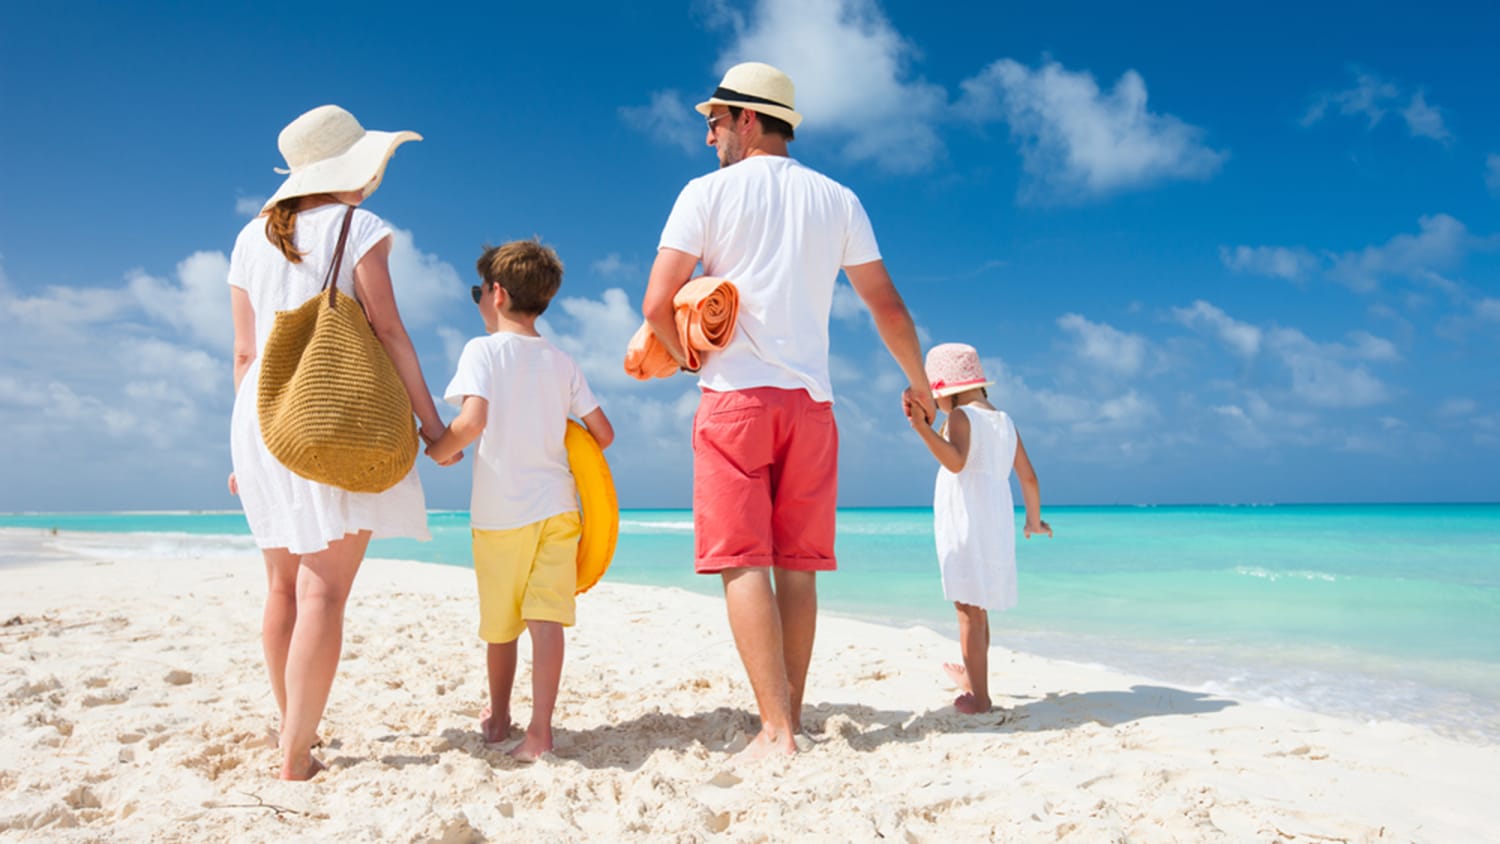 Budget travel: 5 ways to save money on your next family vacation